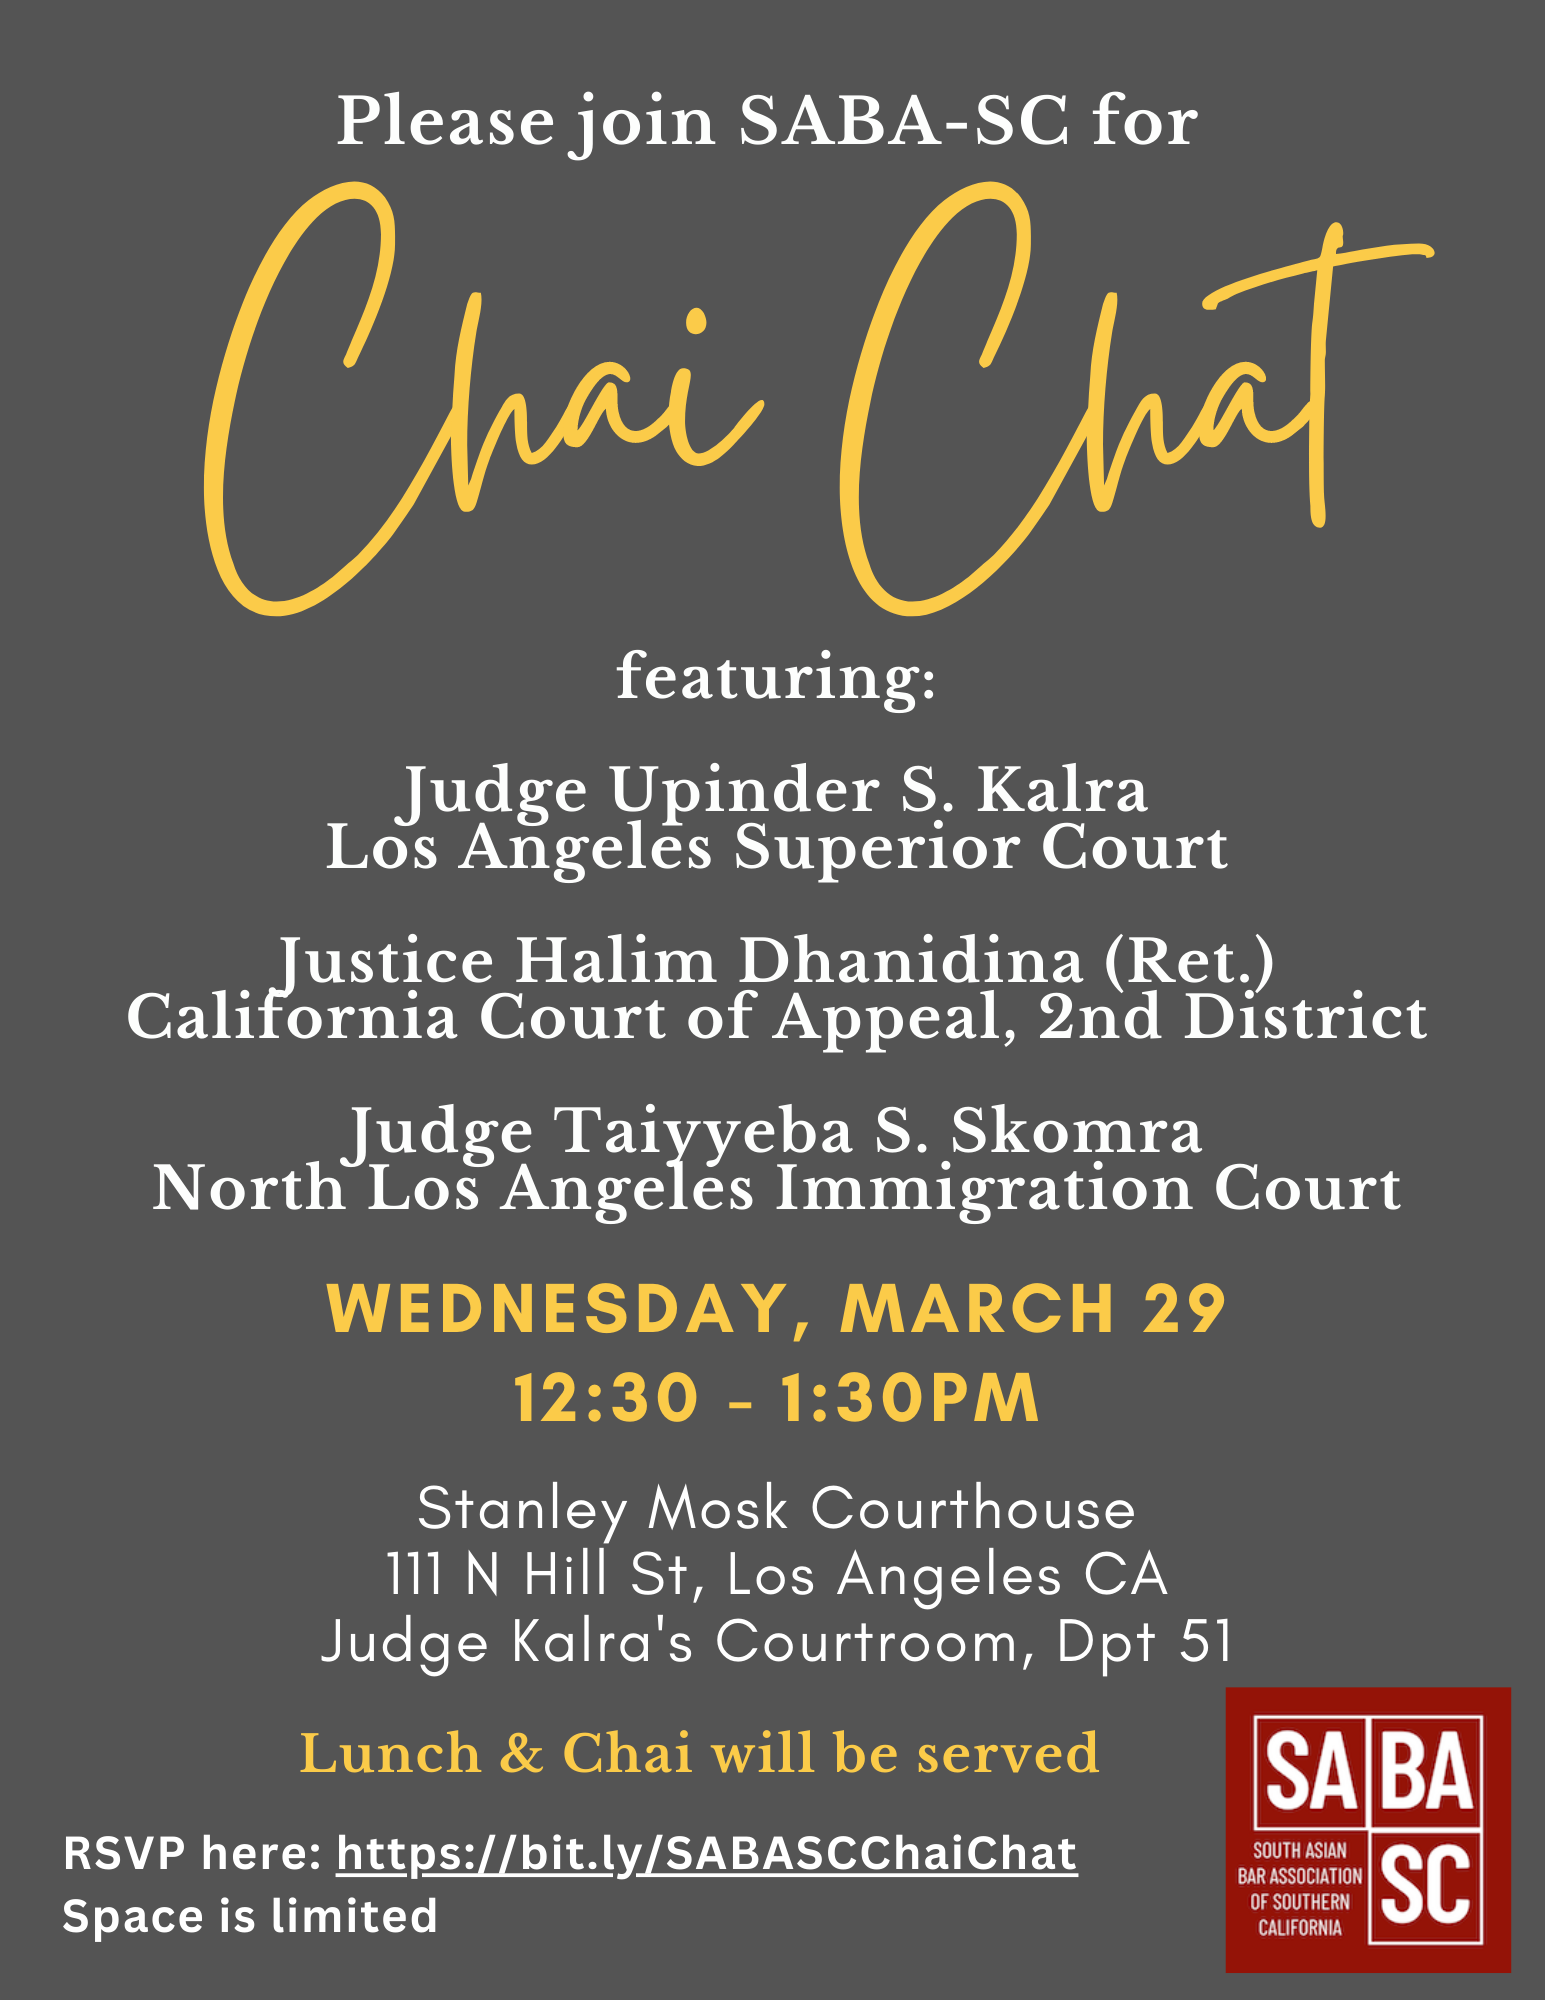 SABA-SC Chai Chat - Wednesday, March 29, 2023, 12:30-1:30 PM, Stanley Mock Courthouse